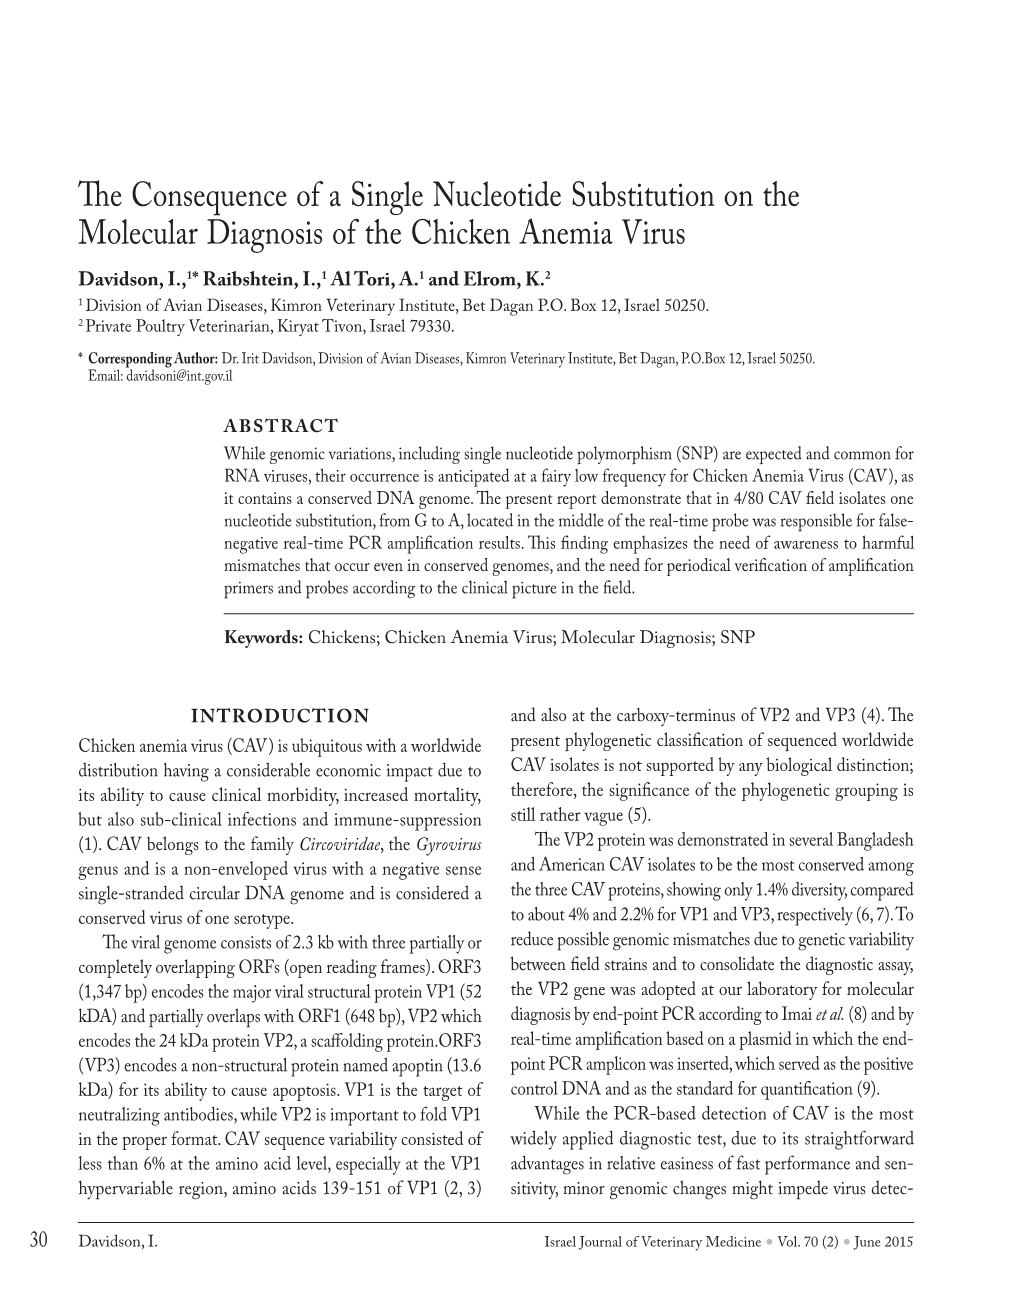 The Consequence of a Single Nucleotide Substitution on The